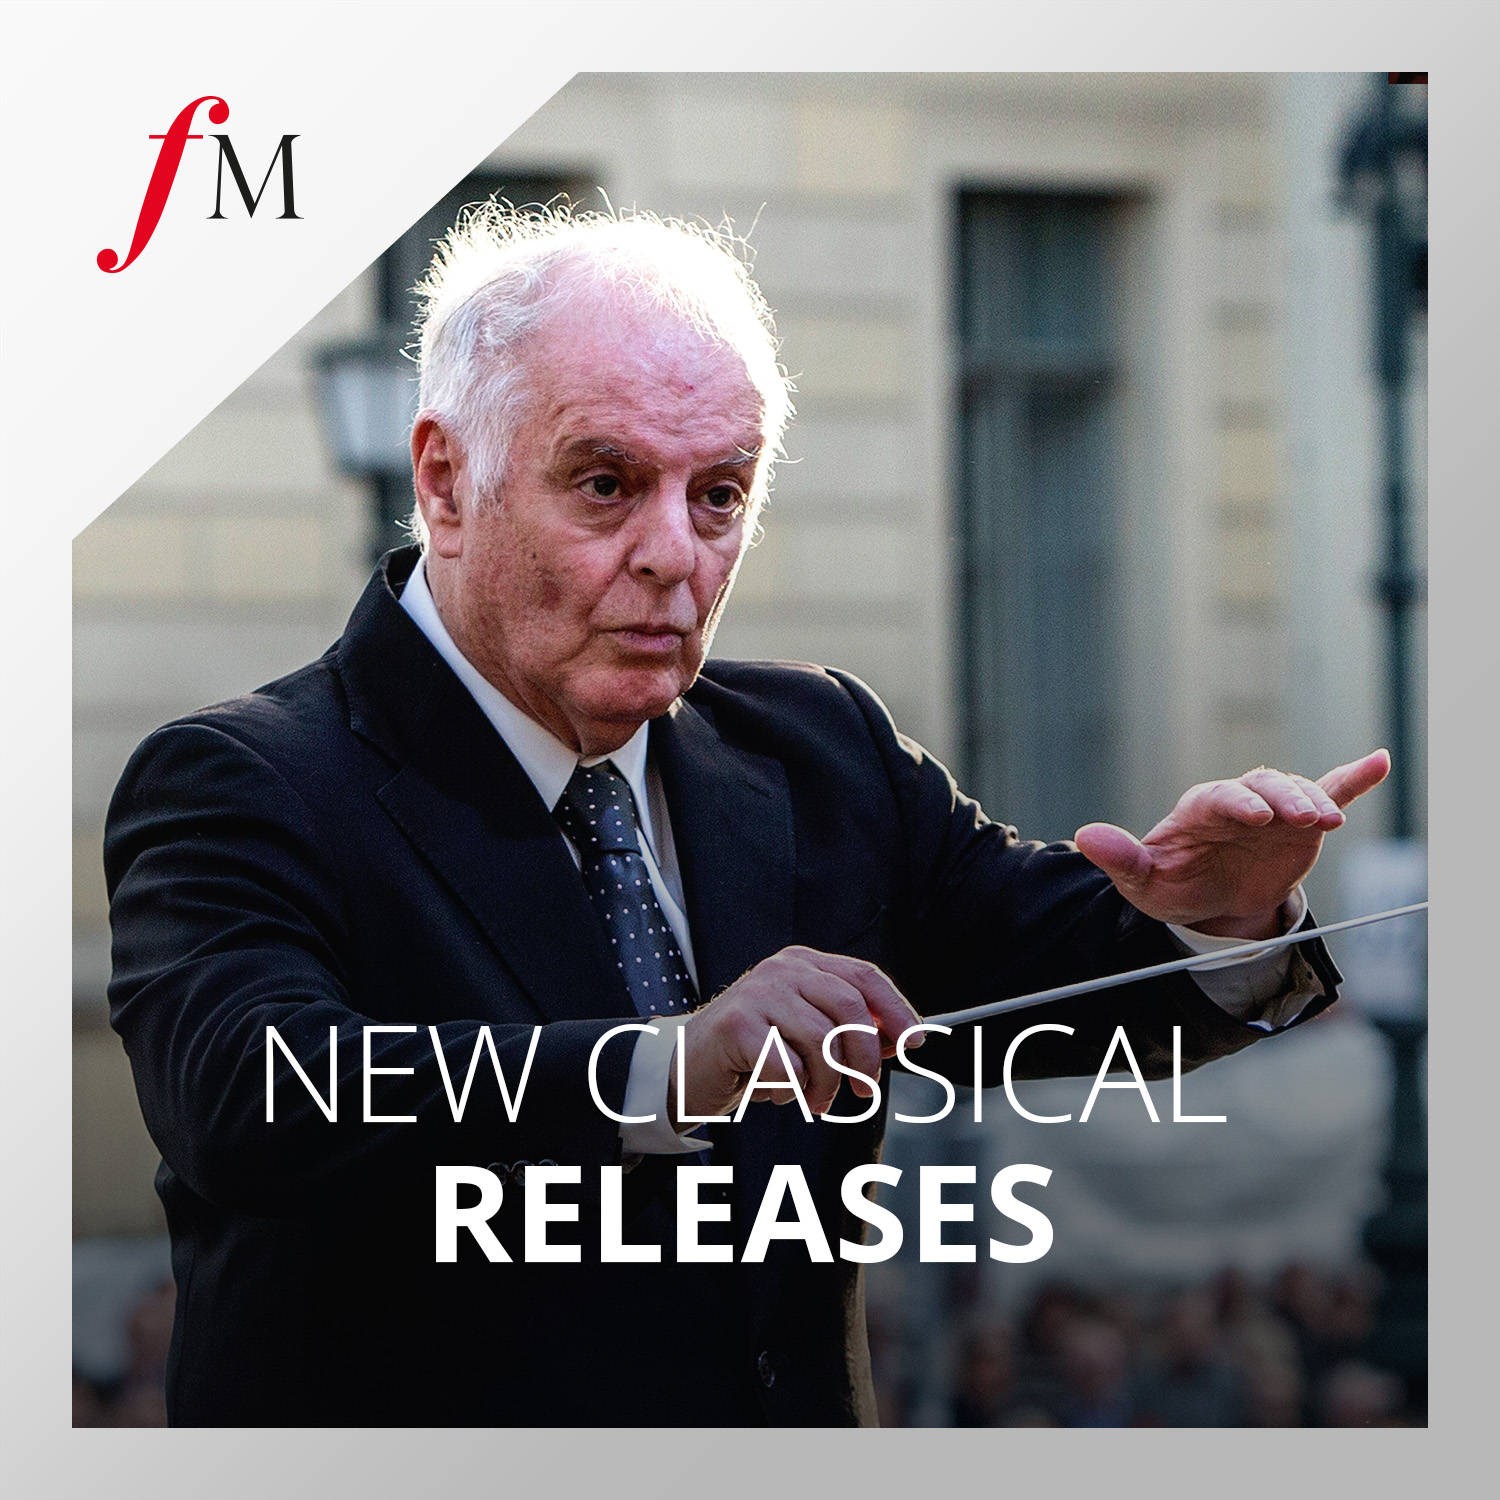 New Classical Releases image